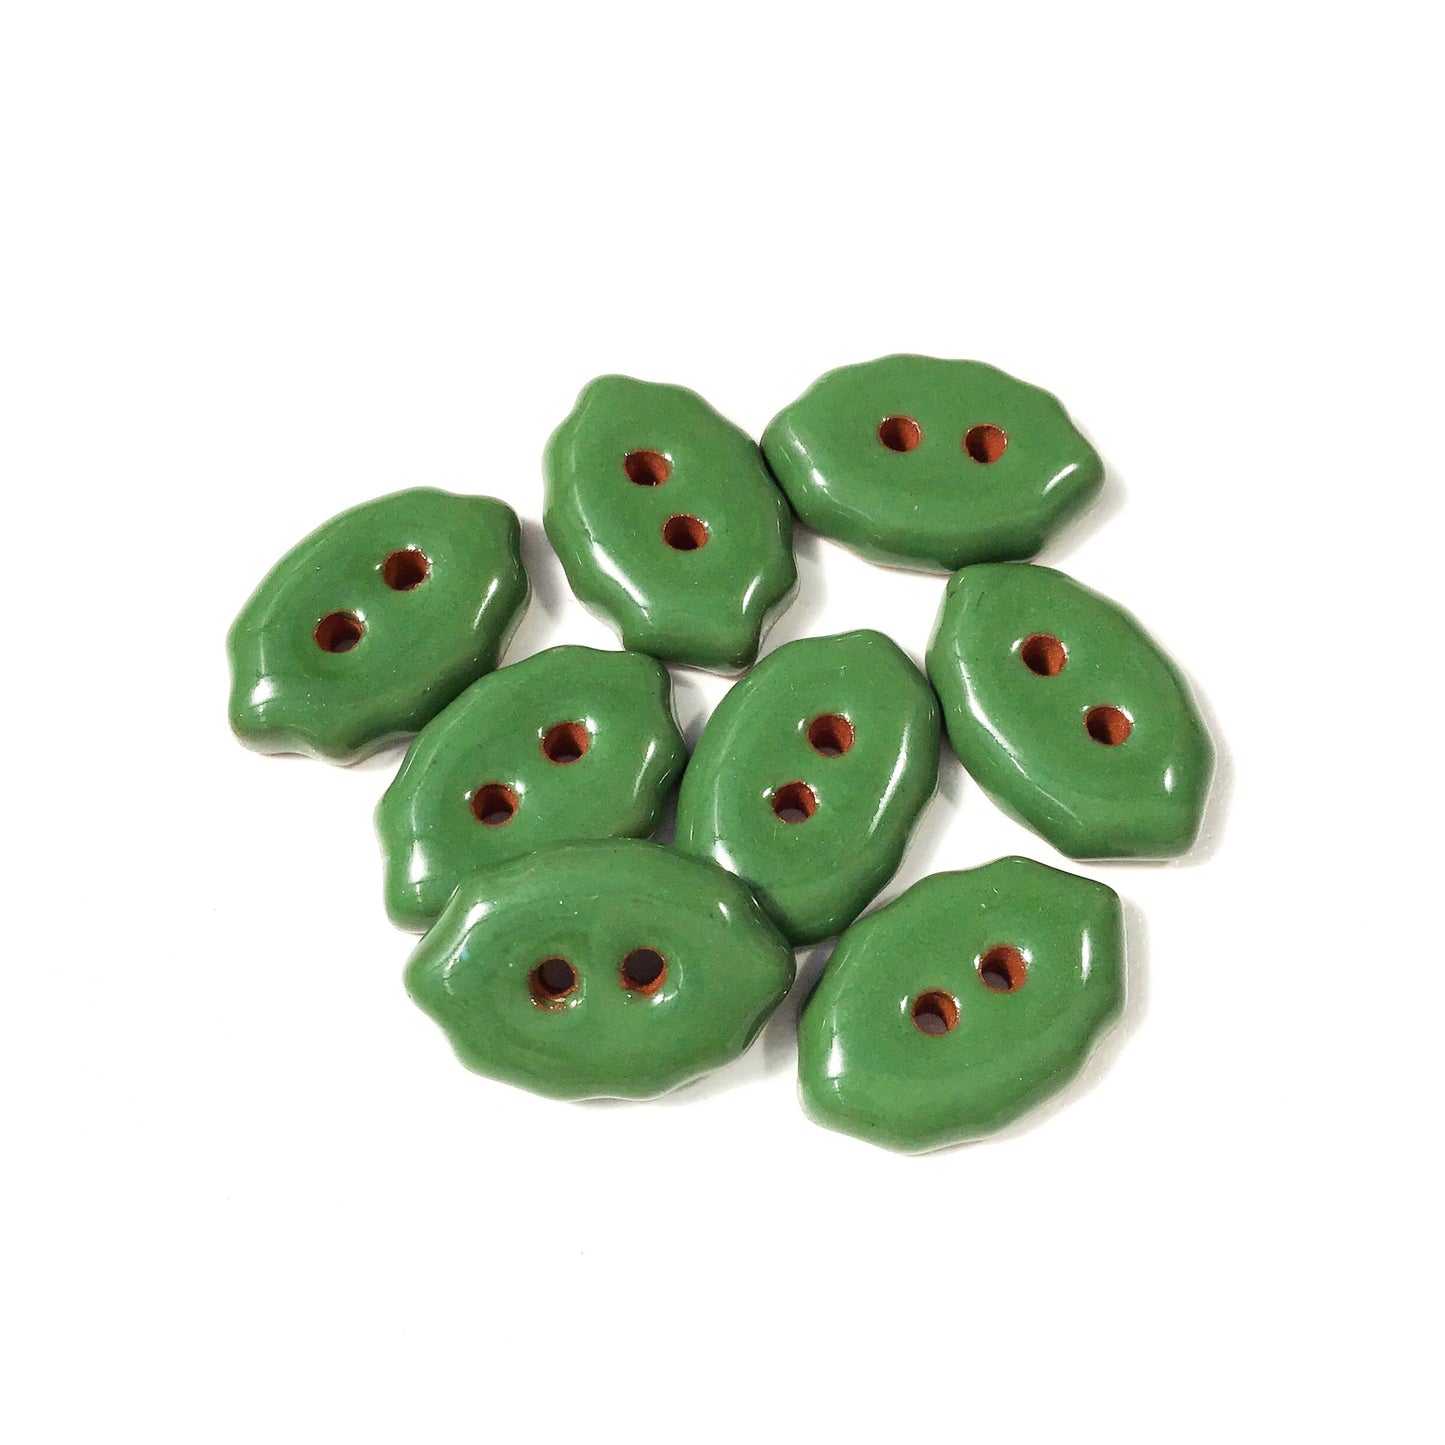 Shamrock Green Oval Clay Buttons - Scalloped Clay Buttons - 1/2" x 3/4" - 8 Pack